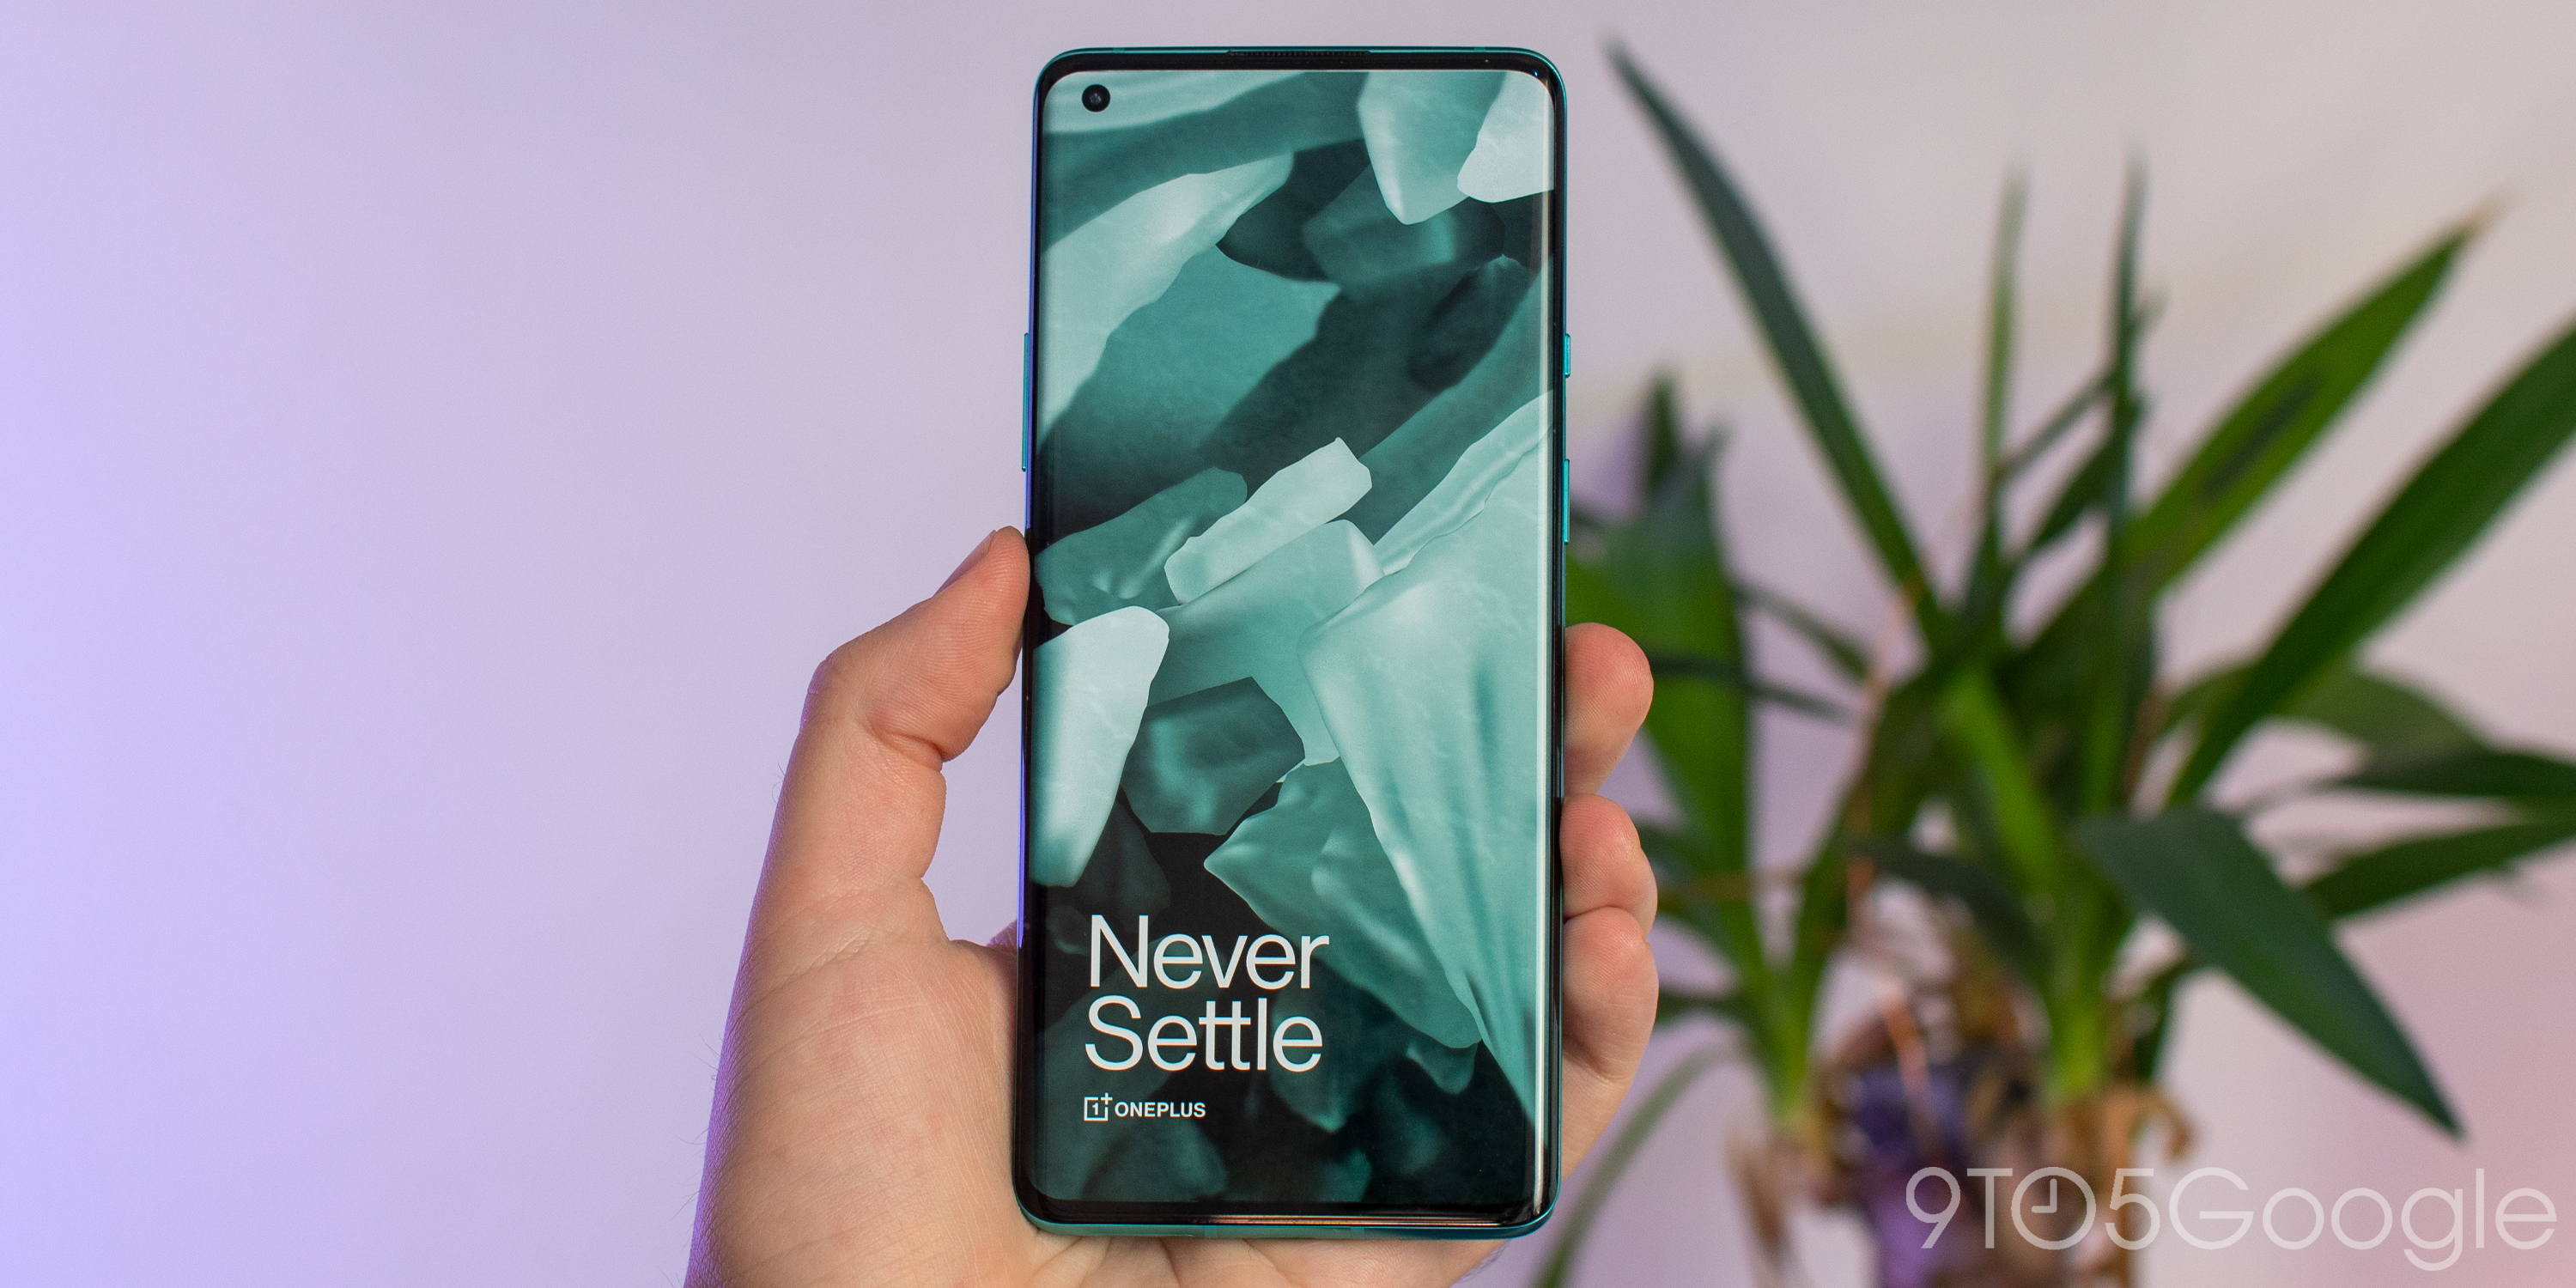 OnePlus wallpaper contest winners announced [Download] - 9to5Google